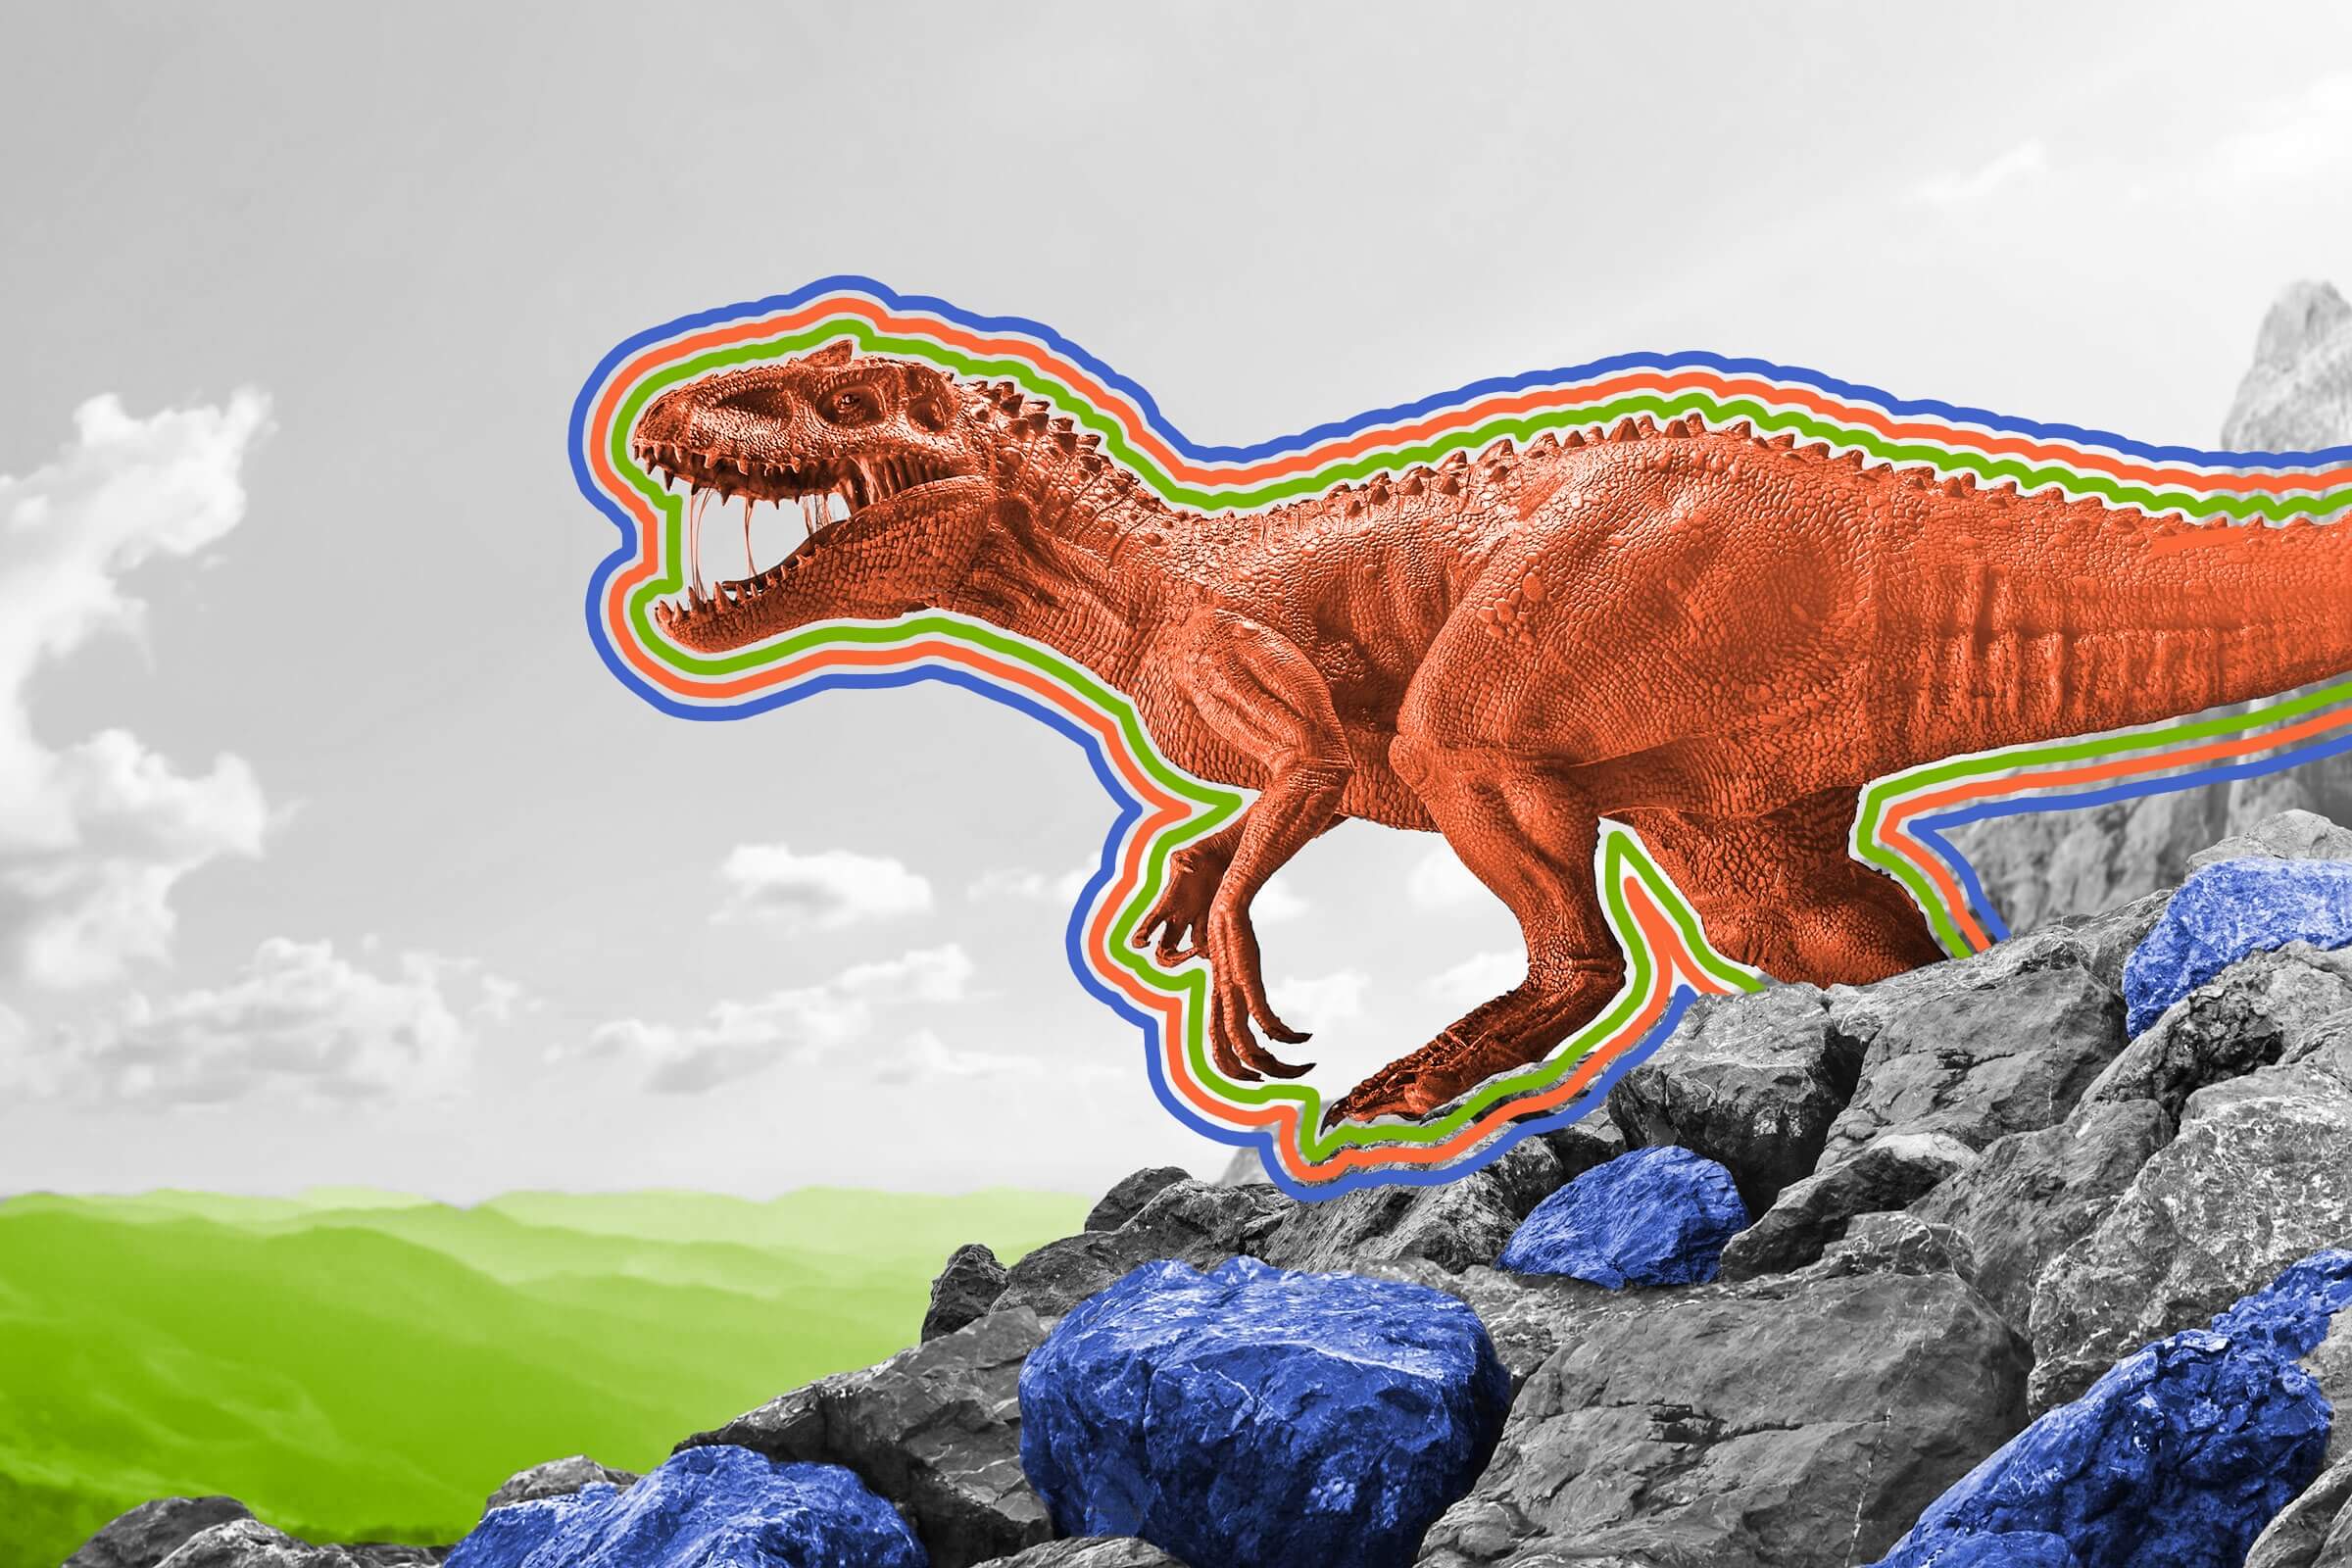 Less time separates humans from Tyrannosaurus rex than separated T. rex from stegosaurus.